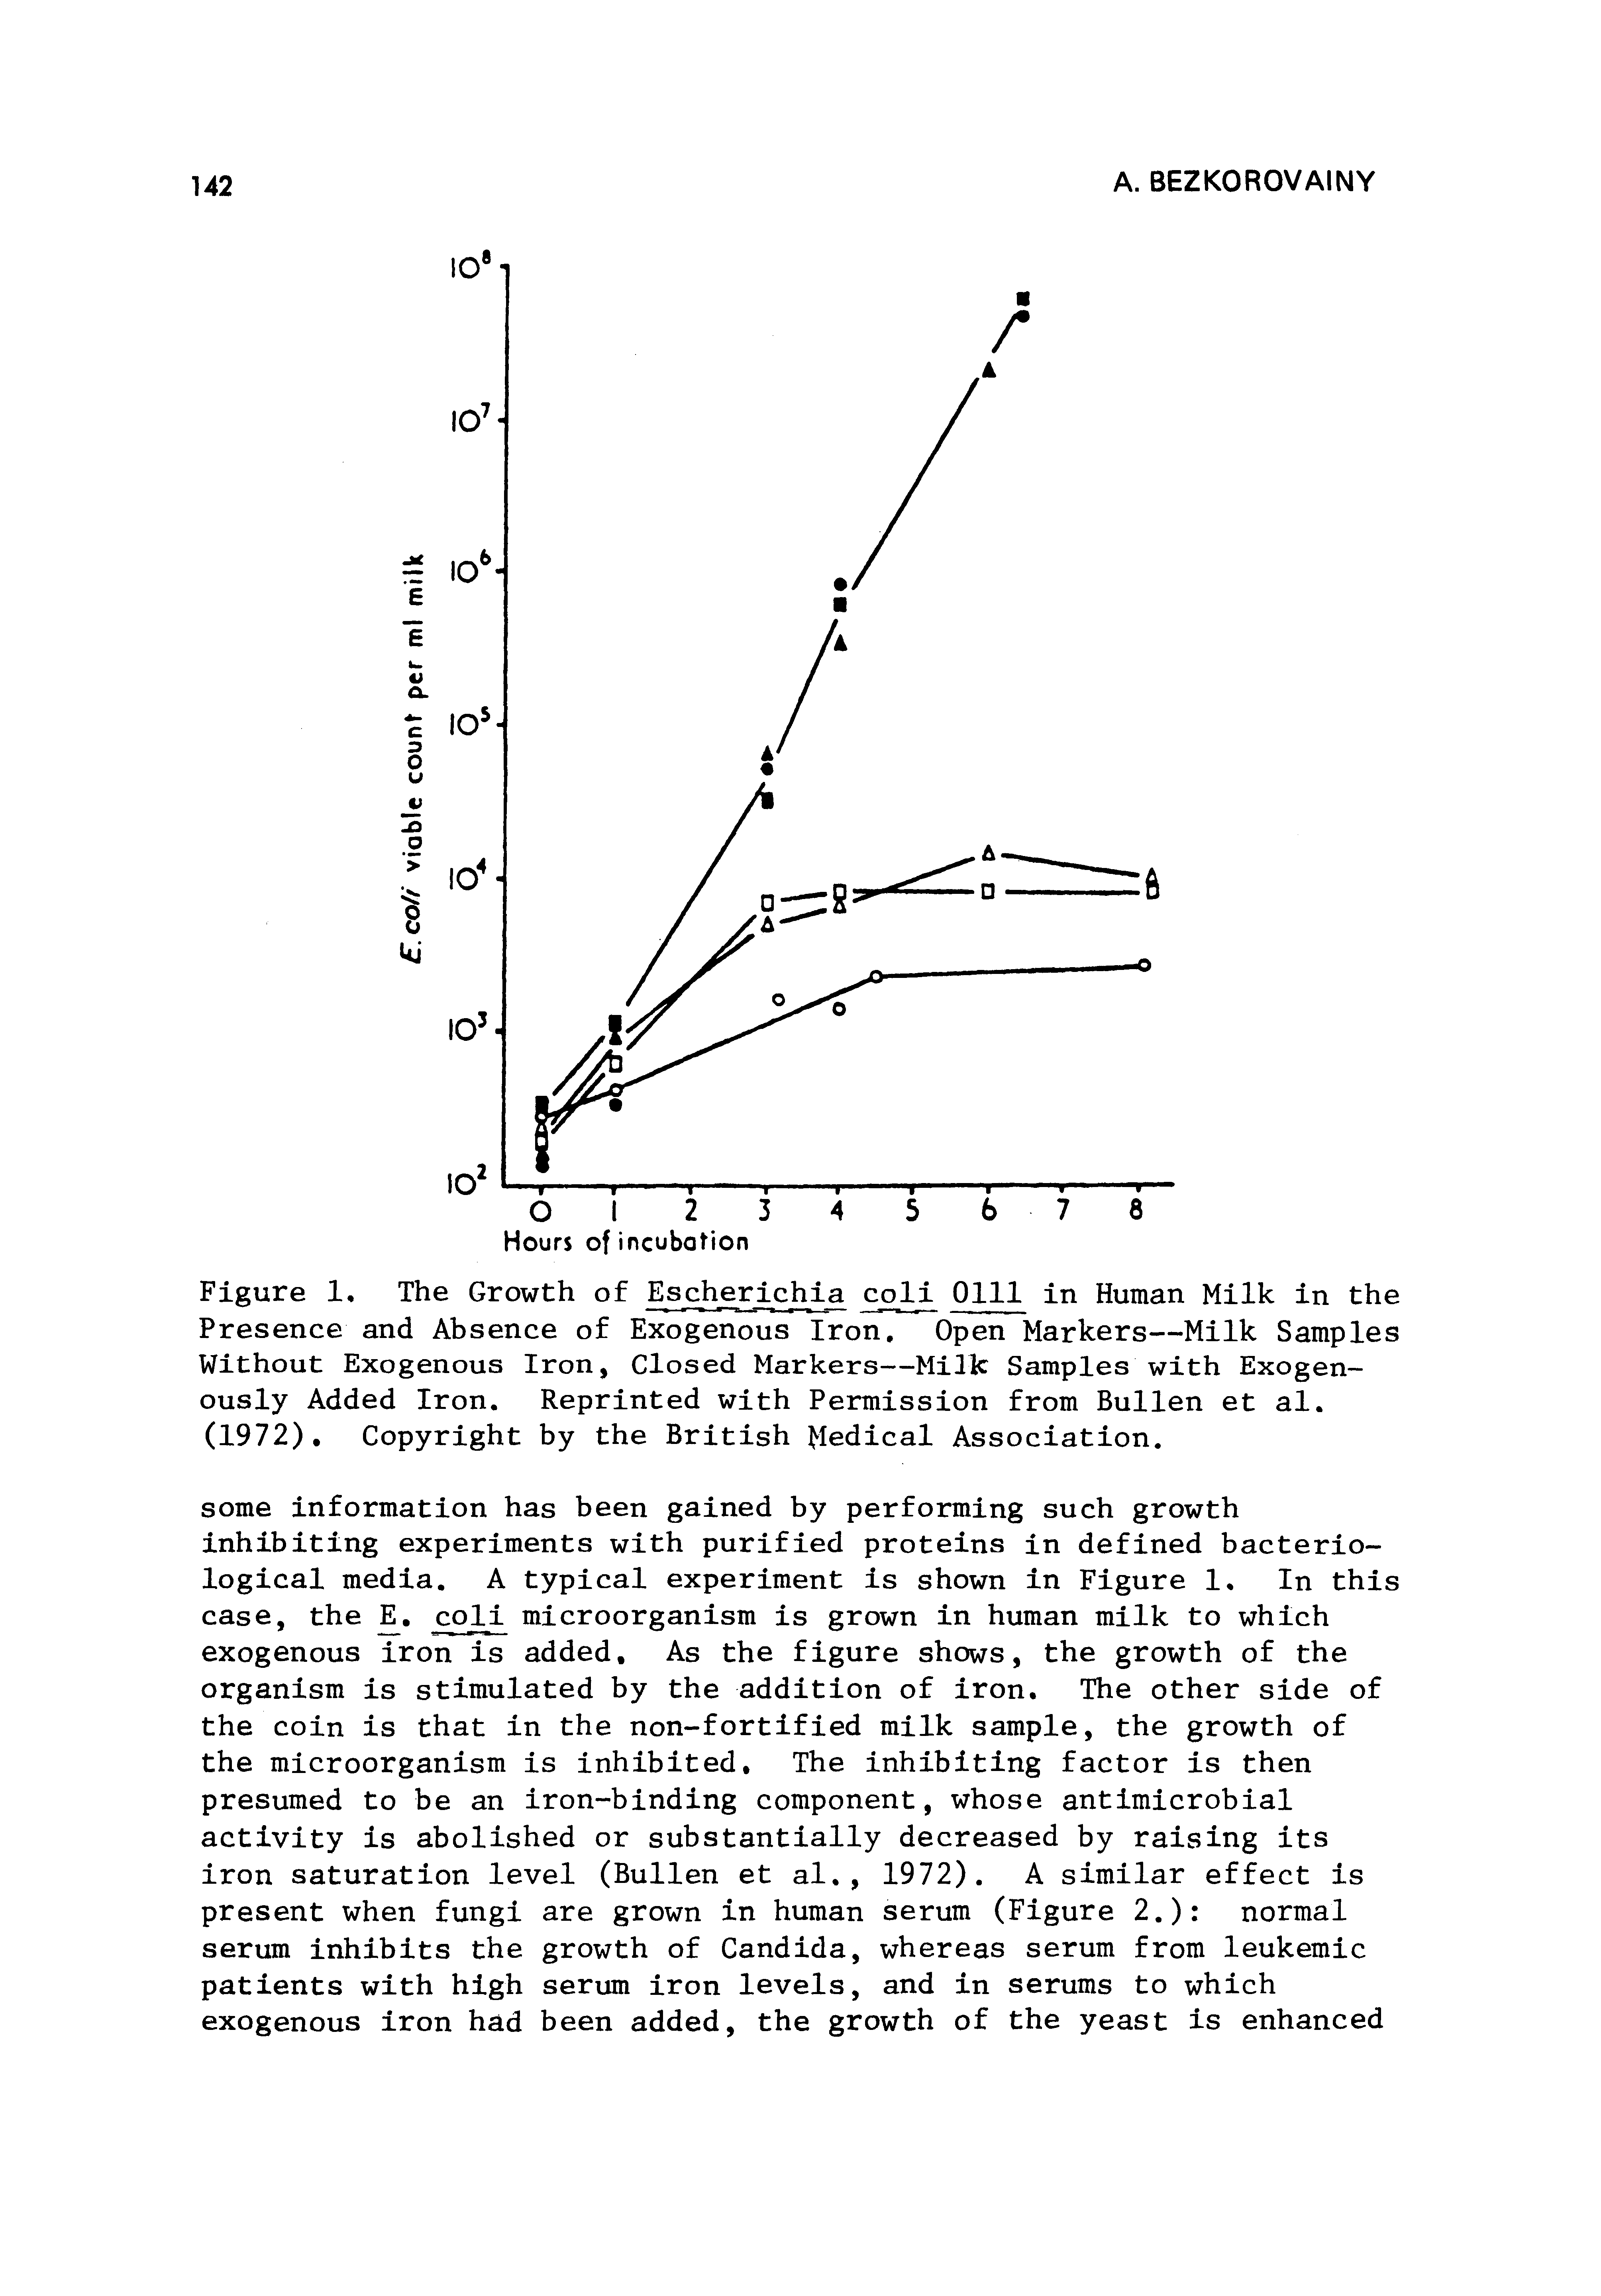 Figure 1, The Growth of Es h rj chia co li 0111 in Human Milk in the Presence and Absence of Exogenous Iron, Open Markers—Milk Samples Without Exogenous Iron, Closed Markers—Milk Samples with Exogenously Added Iron. Reprinted with Permission from Bullen et al. (1972), Copyright by the British Medical Association.